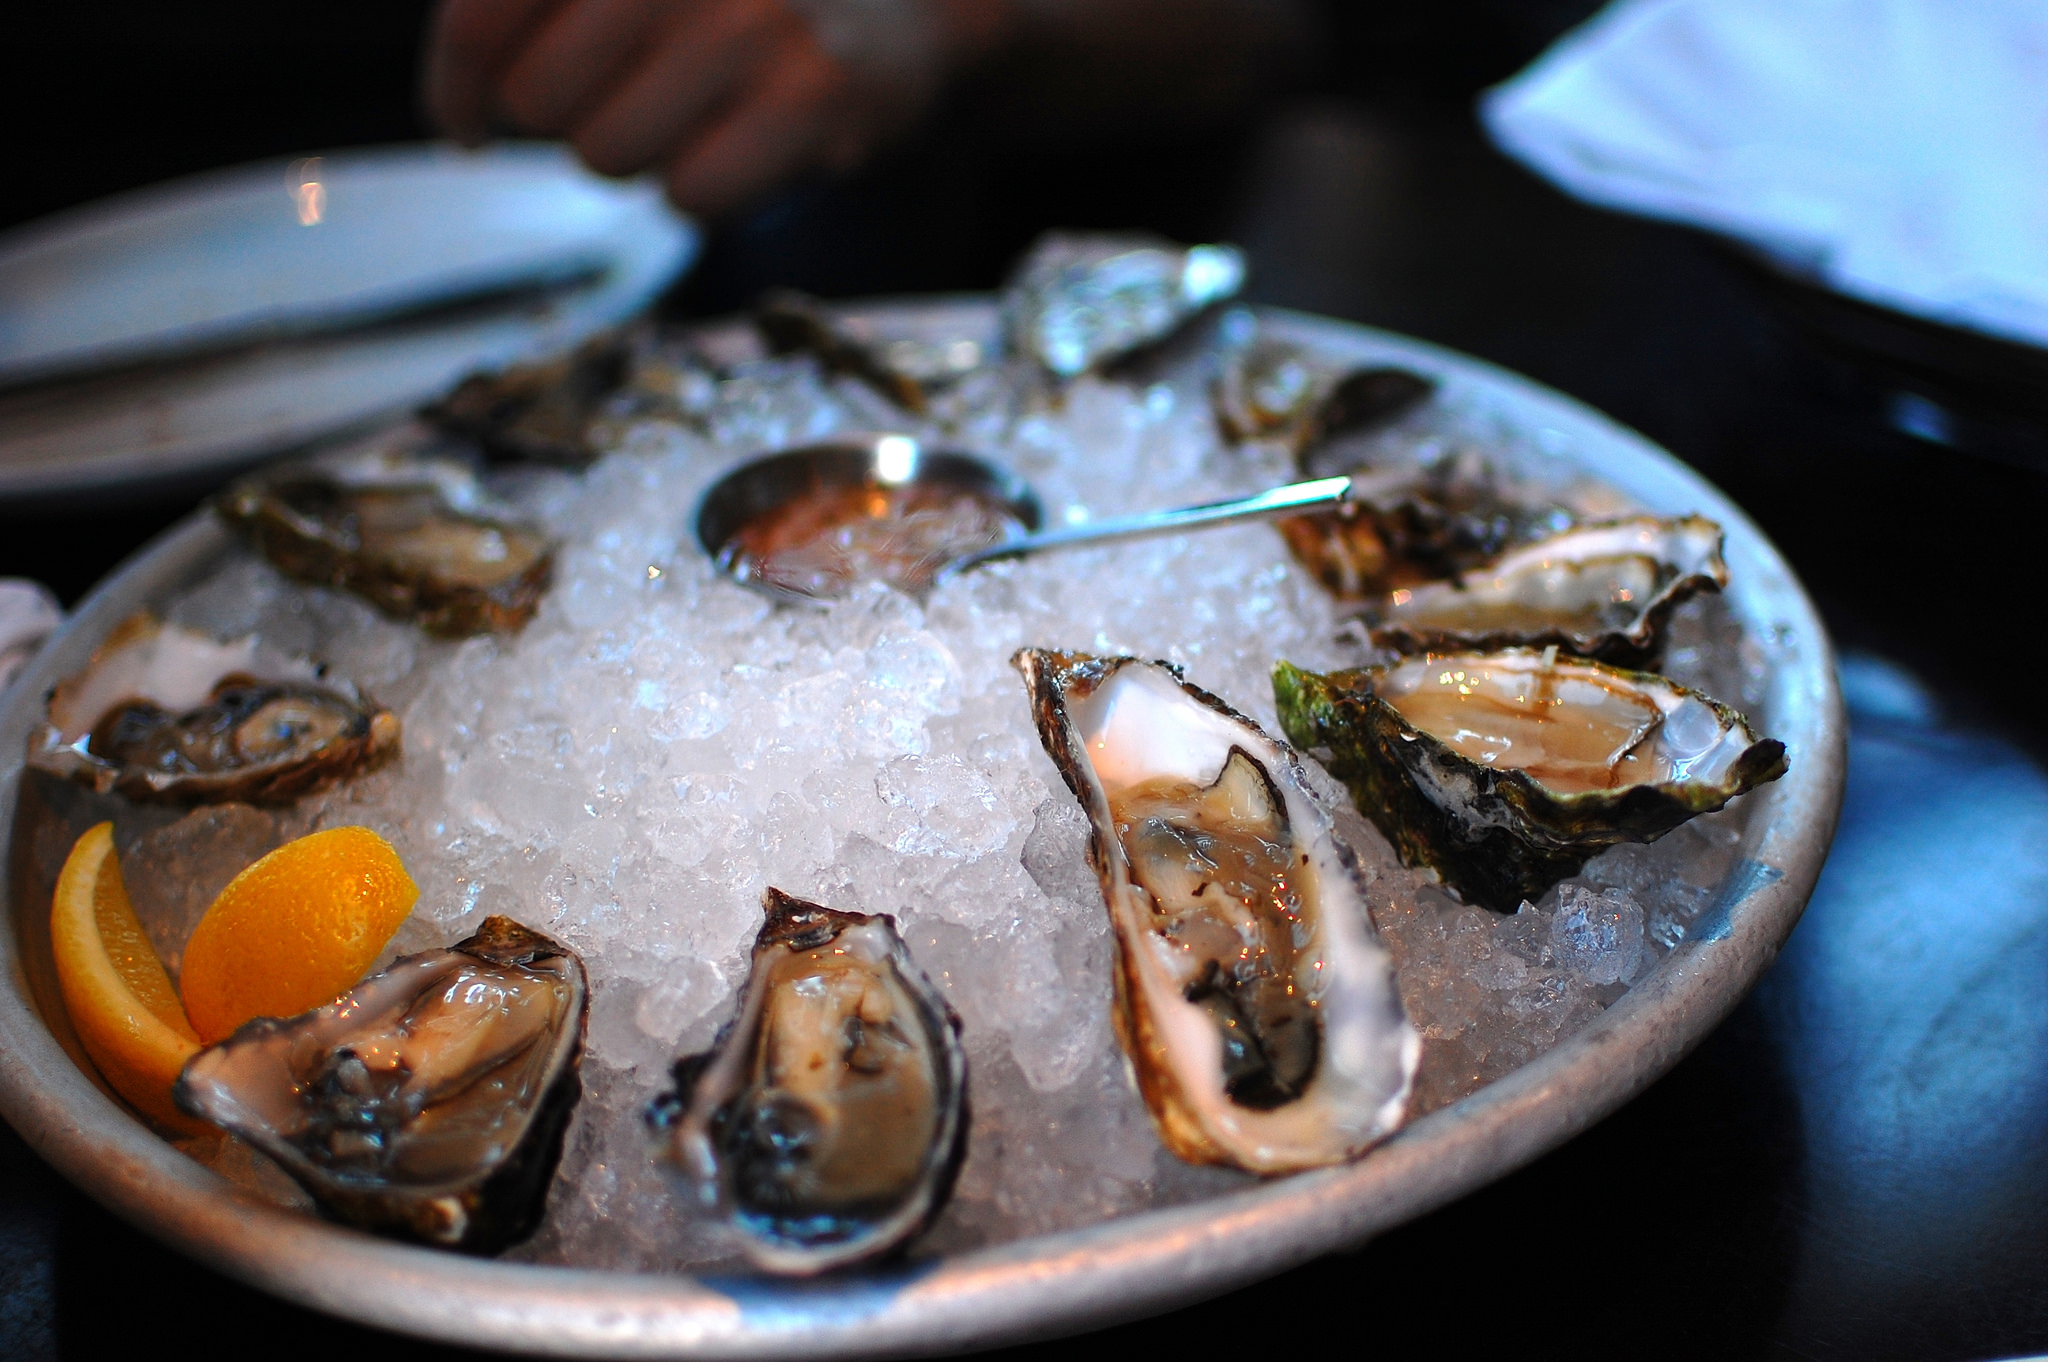 leo's oyster bar is one of the best places to get seafood in SF. Five Places We Love For San Francisco Seafood